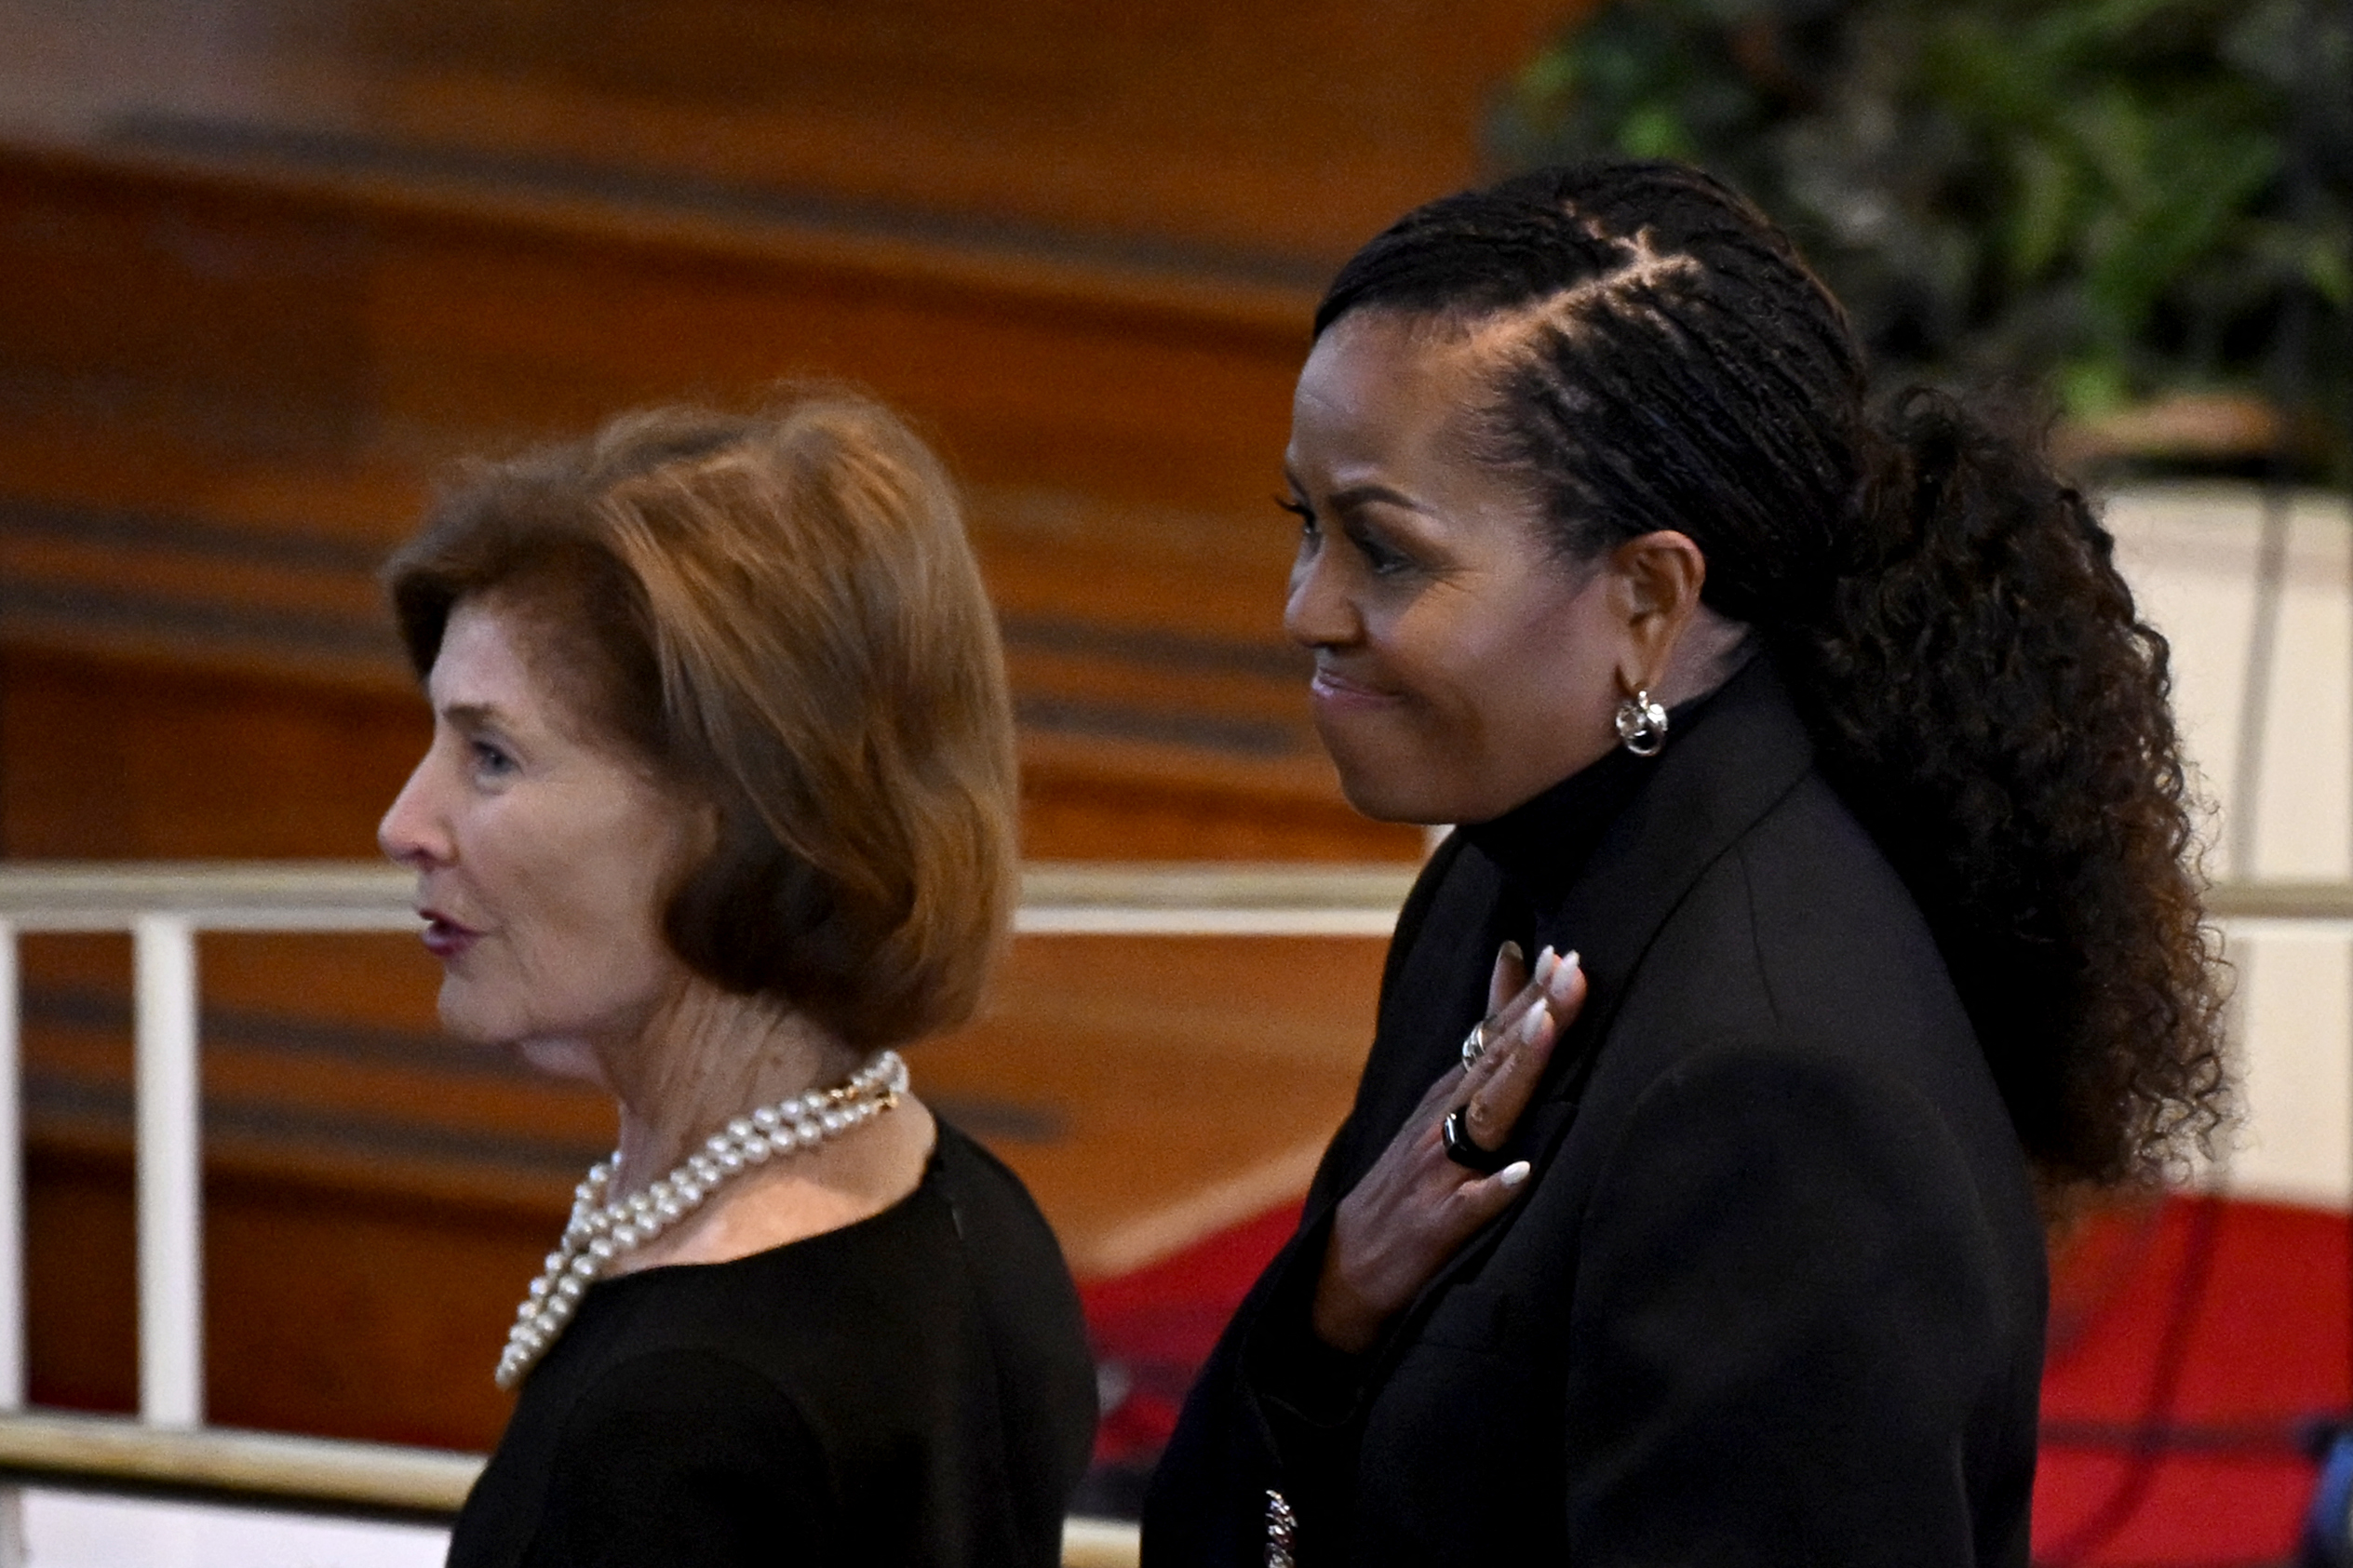 Former U.S. First Ladies Laura Bush and Michelle Obama at former U.S First Lady Rosalynn Carter's tribute service in Atlanta, Georgia on November 28, 2023 | Source: Getty Images